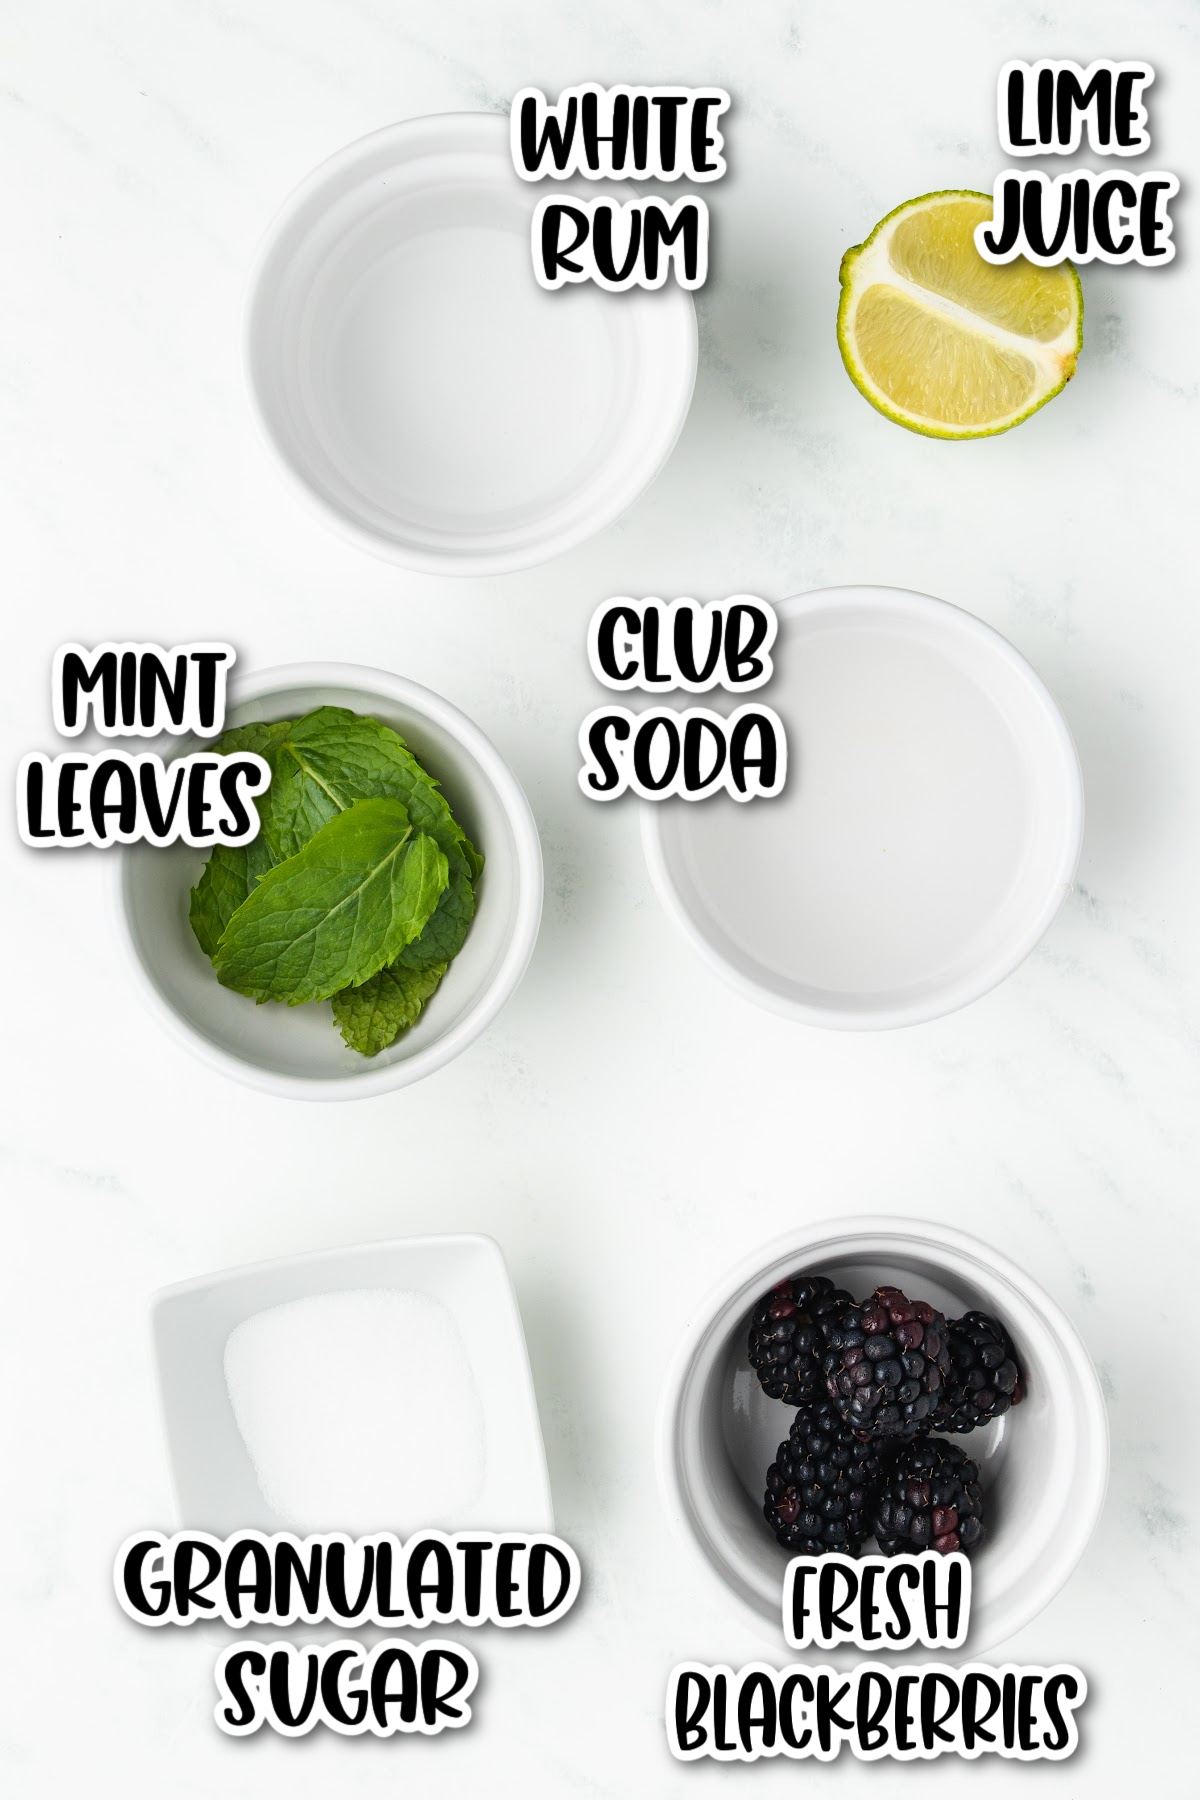 The ingredients for a blackberry mojito